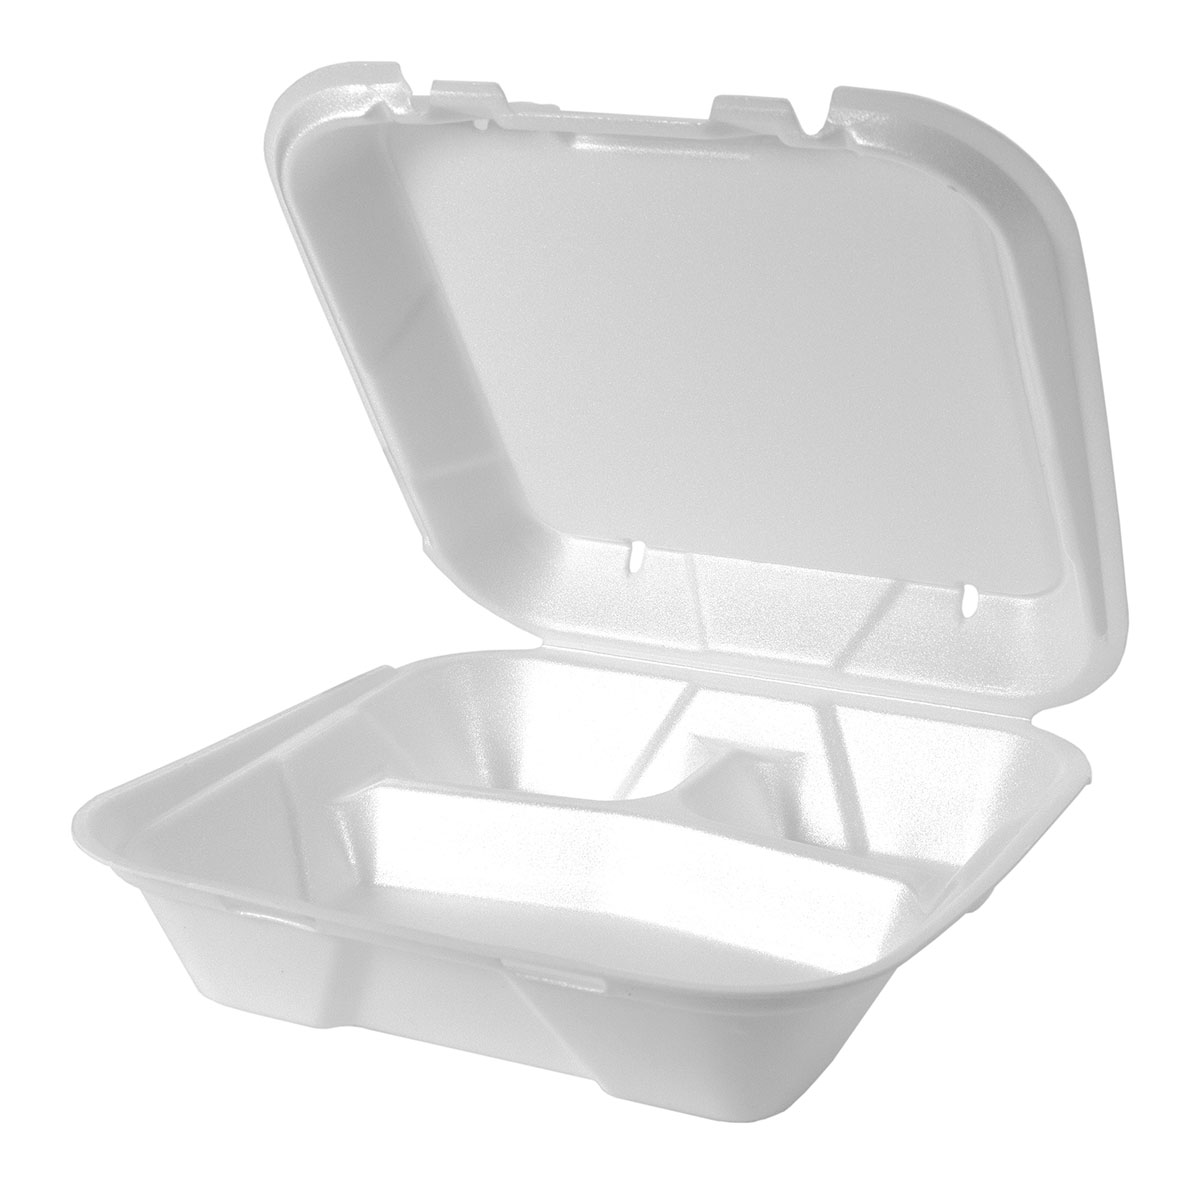 White 9" x 9" Three-Compartment Snap It Lock Vented Hinged Square Container